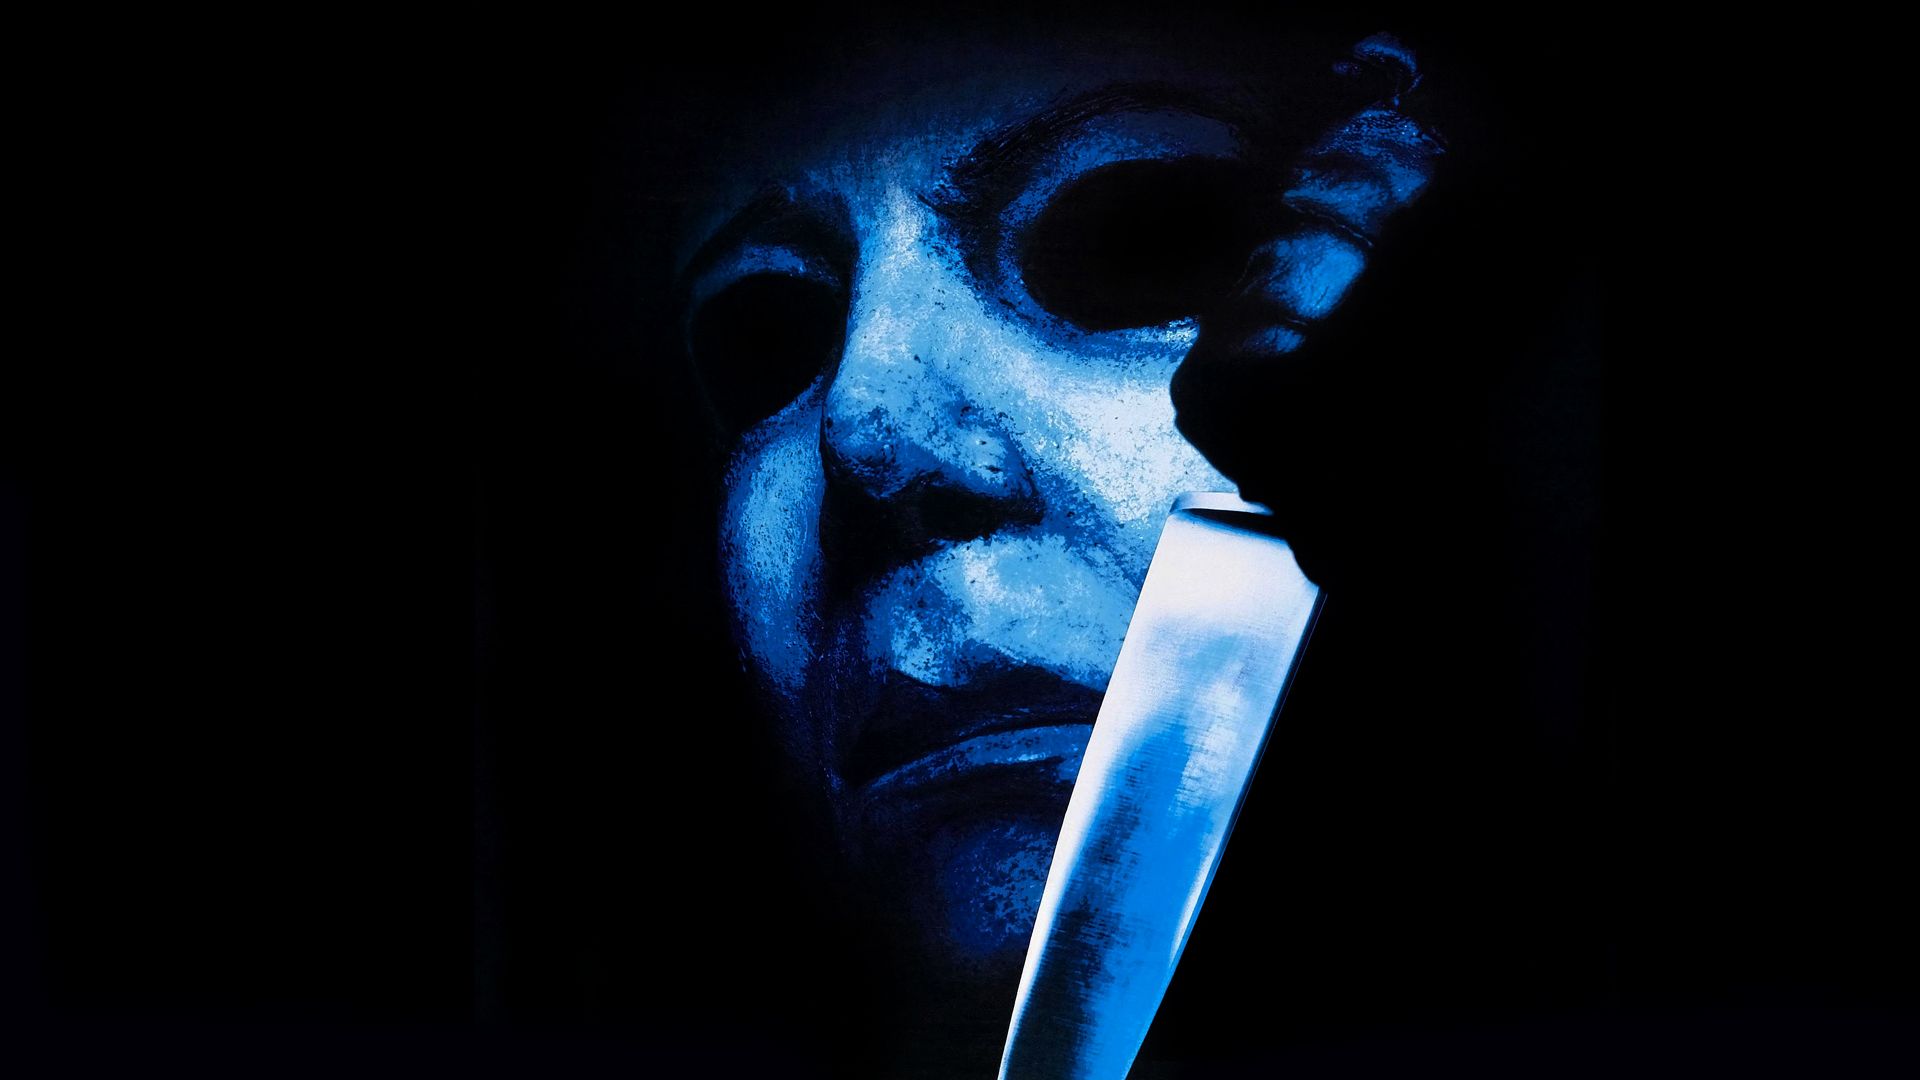 Halloween: The Curse of Michael Myers background